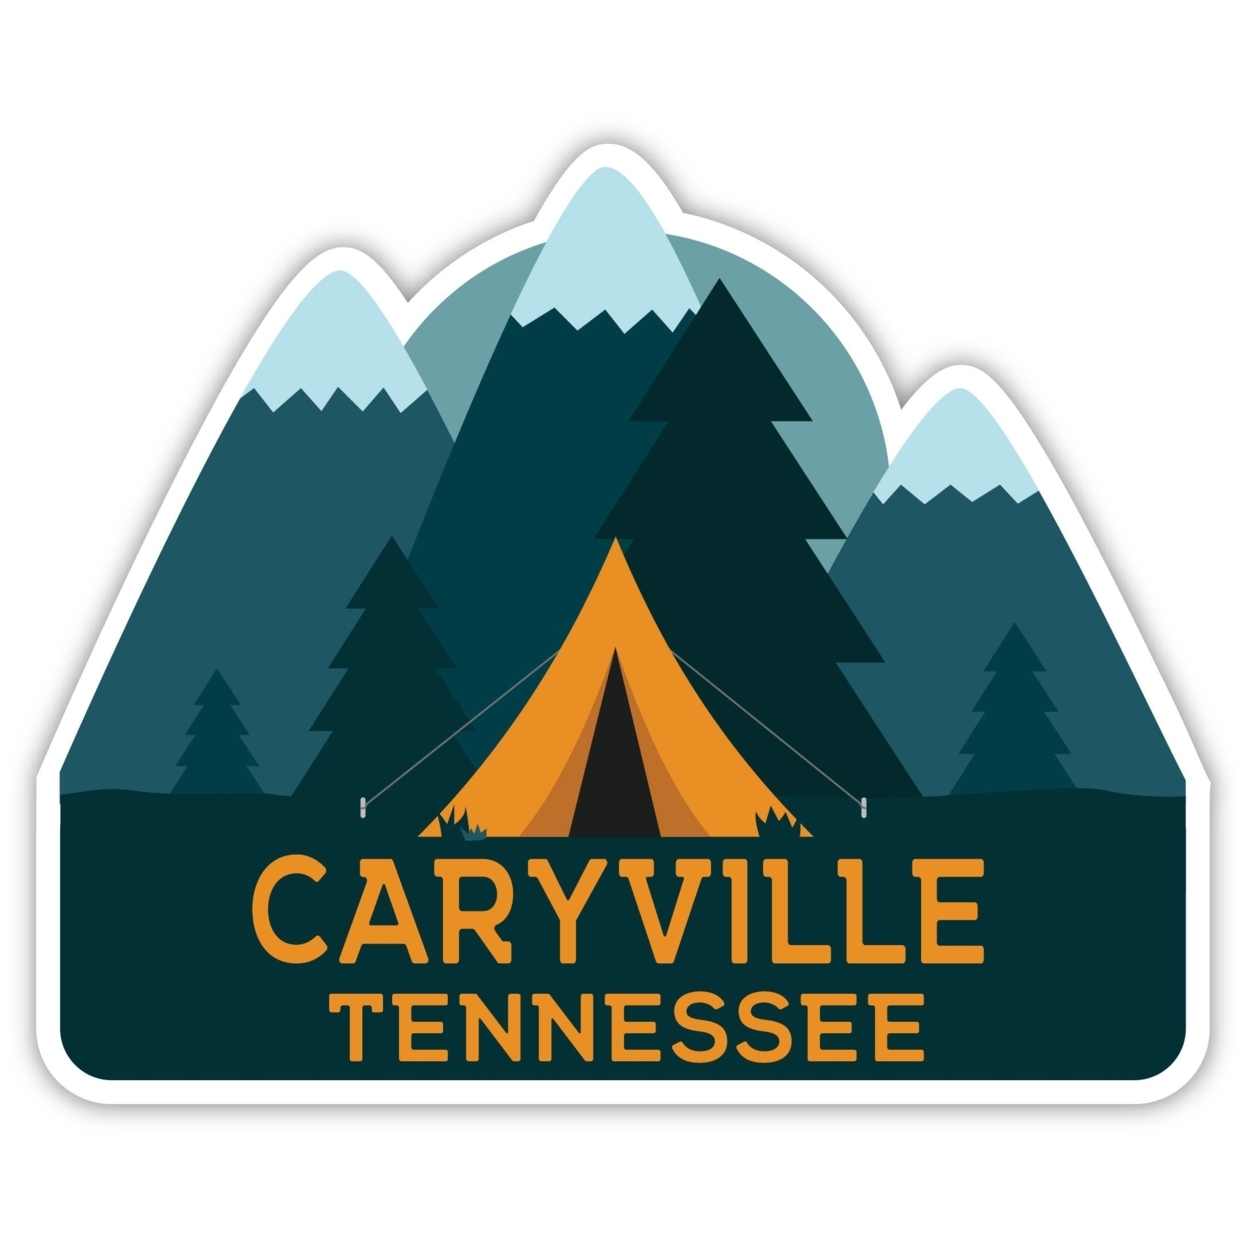 Caryville Tennessee Souvenir Decorative Stickers (Choose Theme And Size) - 4-Pack, 6-Inch, Tent